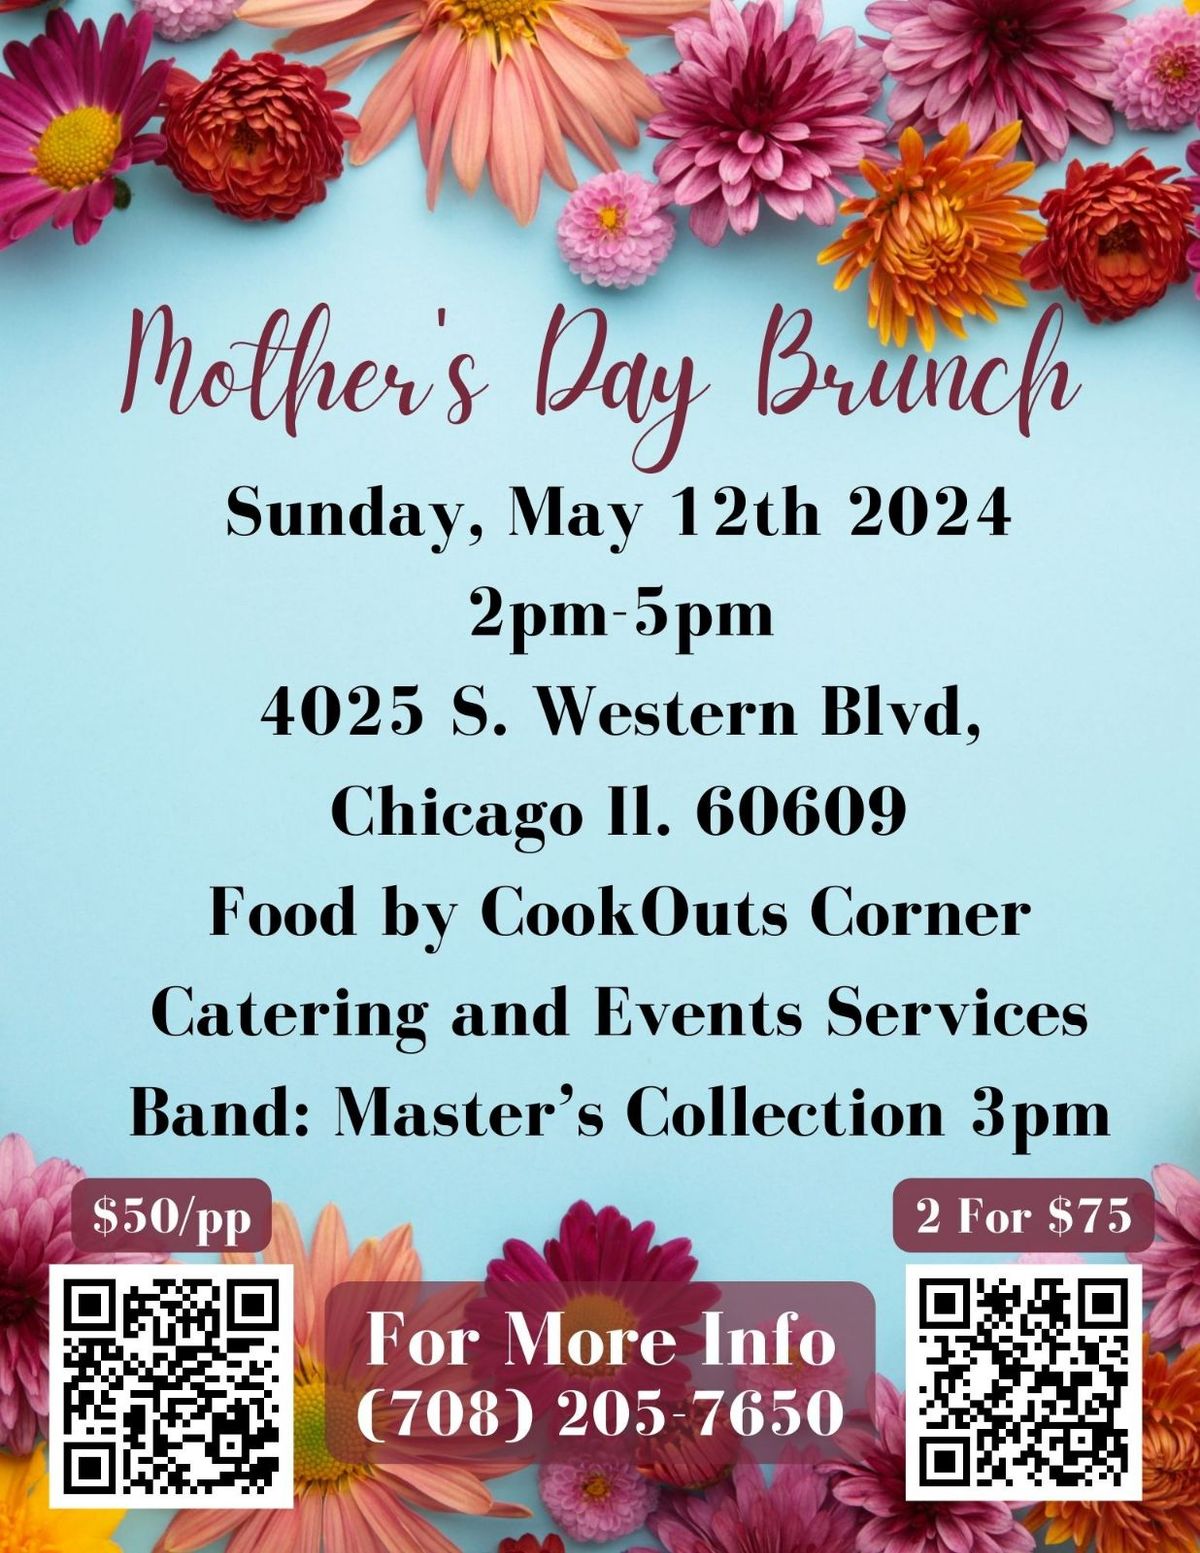 Bottomless Mother's Day Brunch